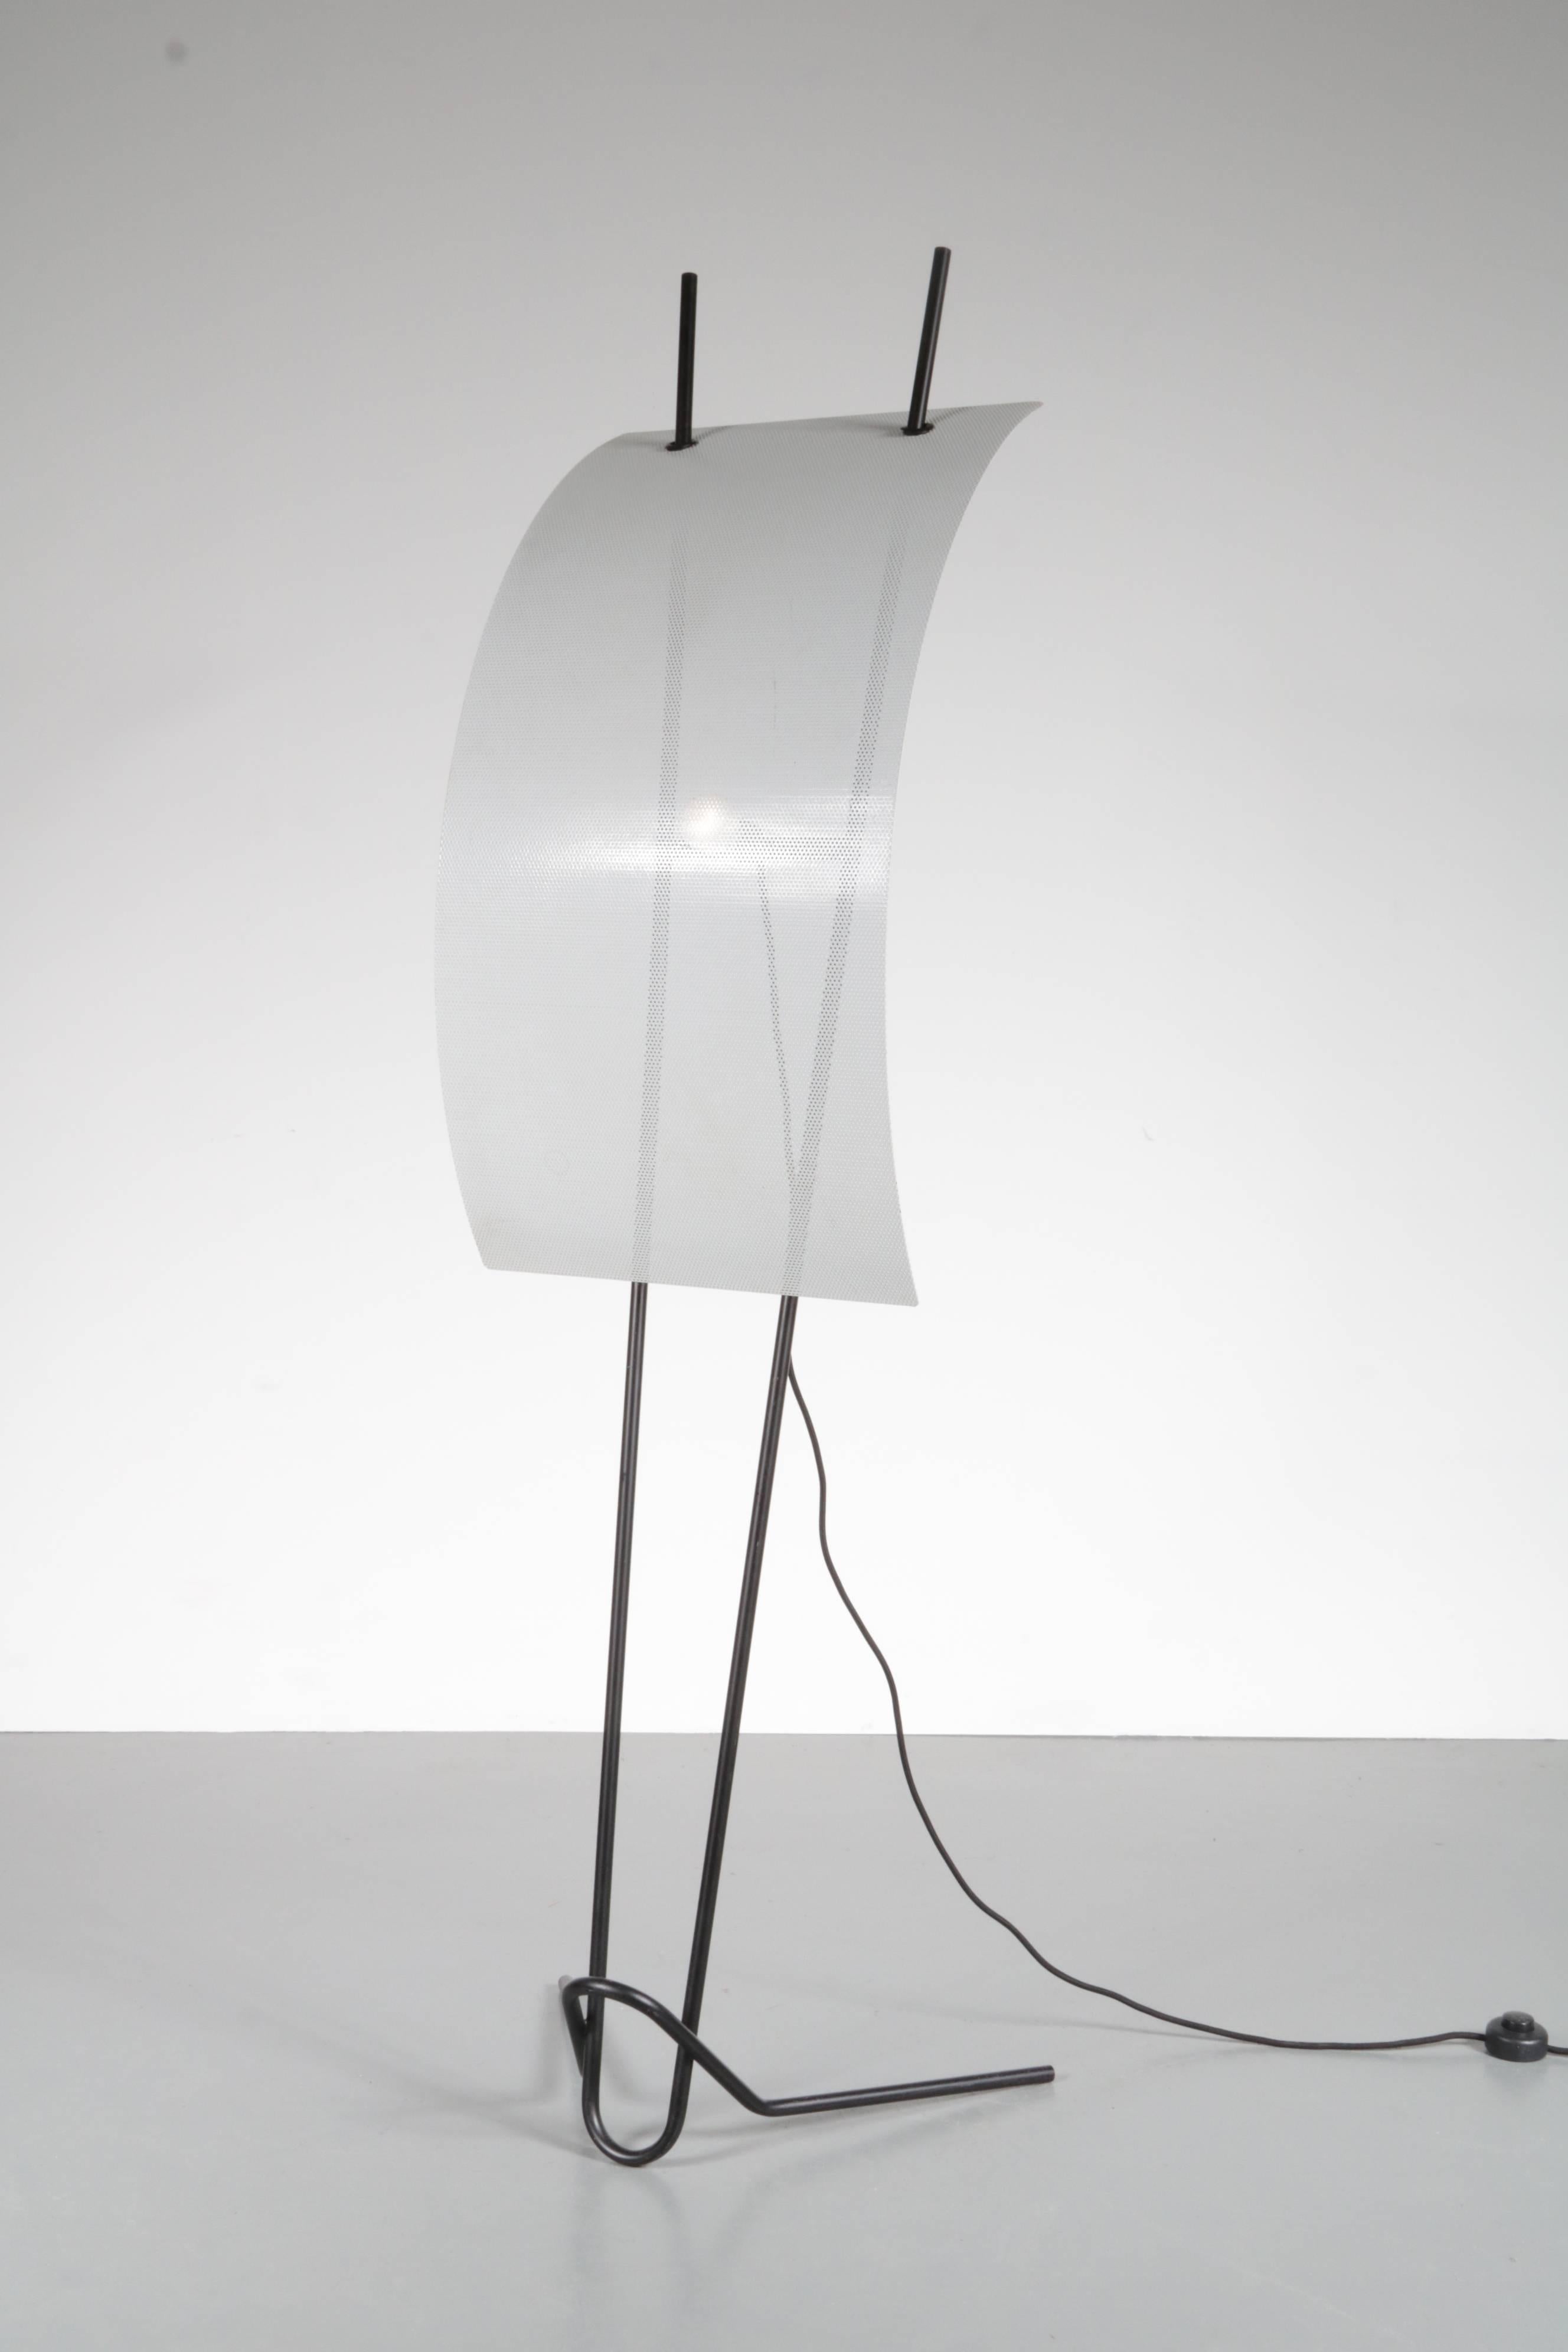 A large eye-catching floor lamp in the style of Mario Botta, manufactured in Italy, circa 1980.

This wonderful piece resembles the shape of a sail, with a black lacquered bent metal base and a big white perforated metal shade. The base pierces to